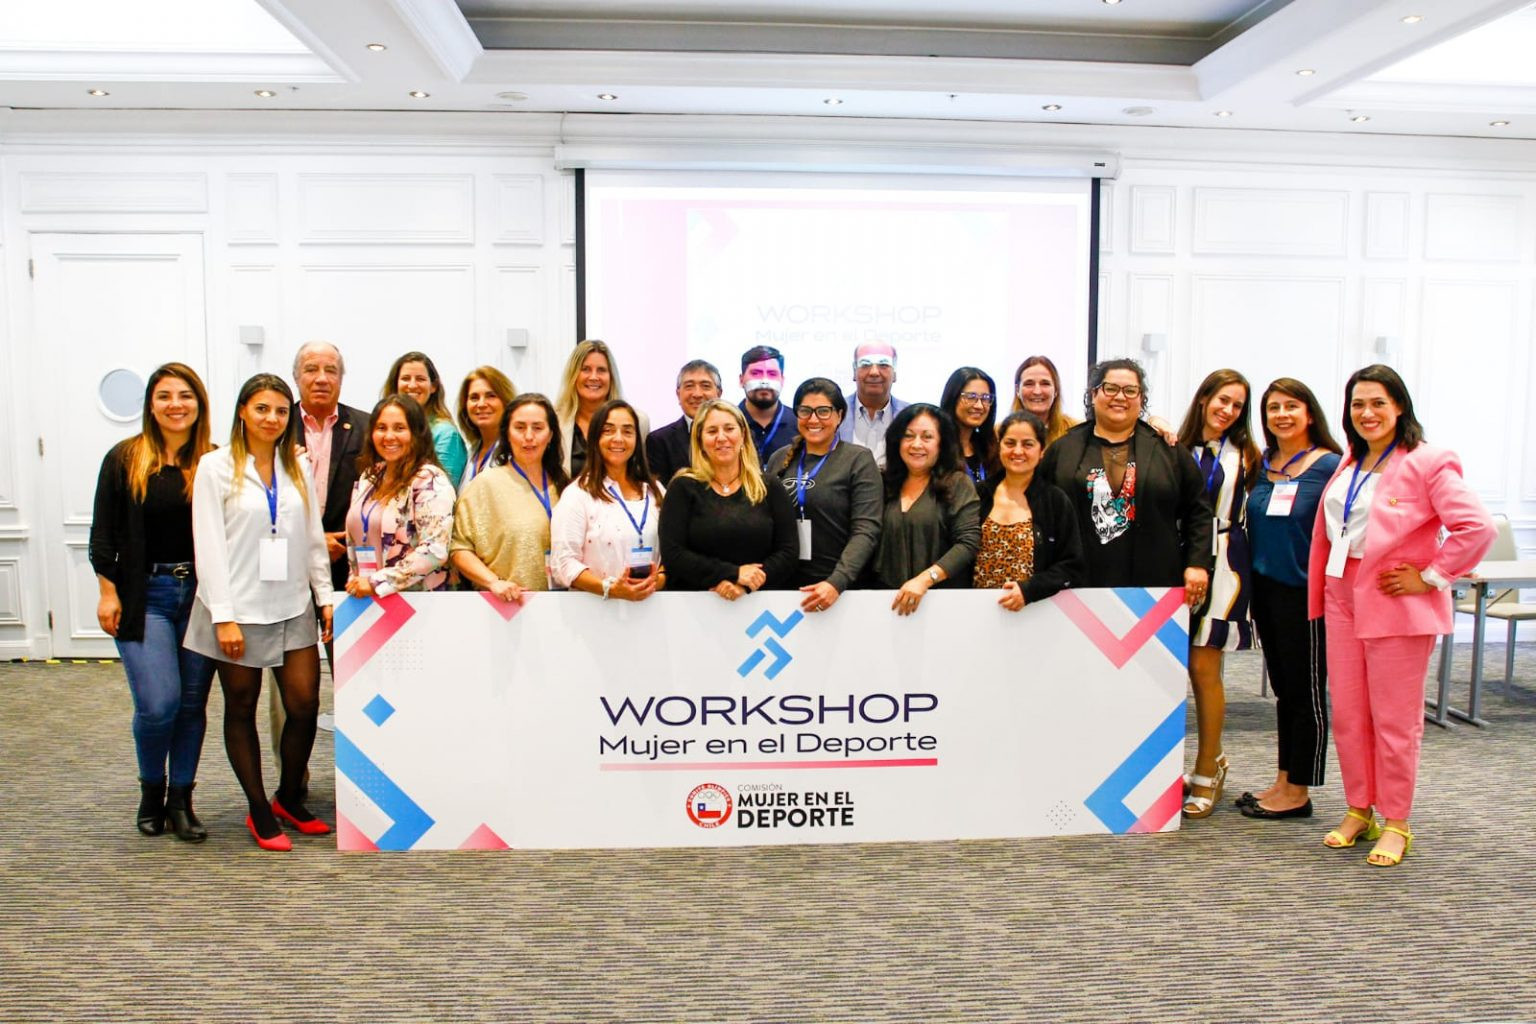 Chilean Olympic Committee's Women in Sports Workshop attended by 22 federations